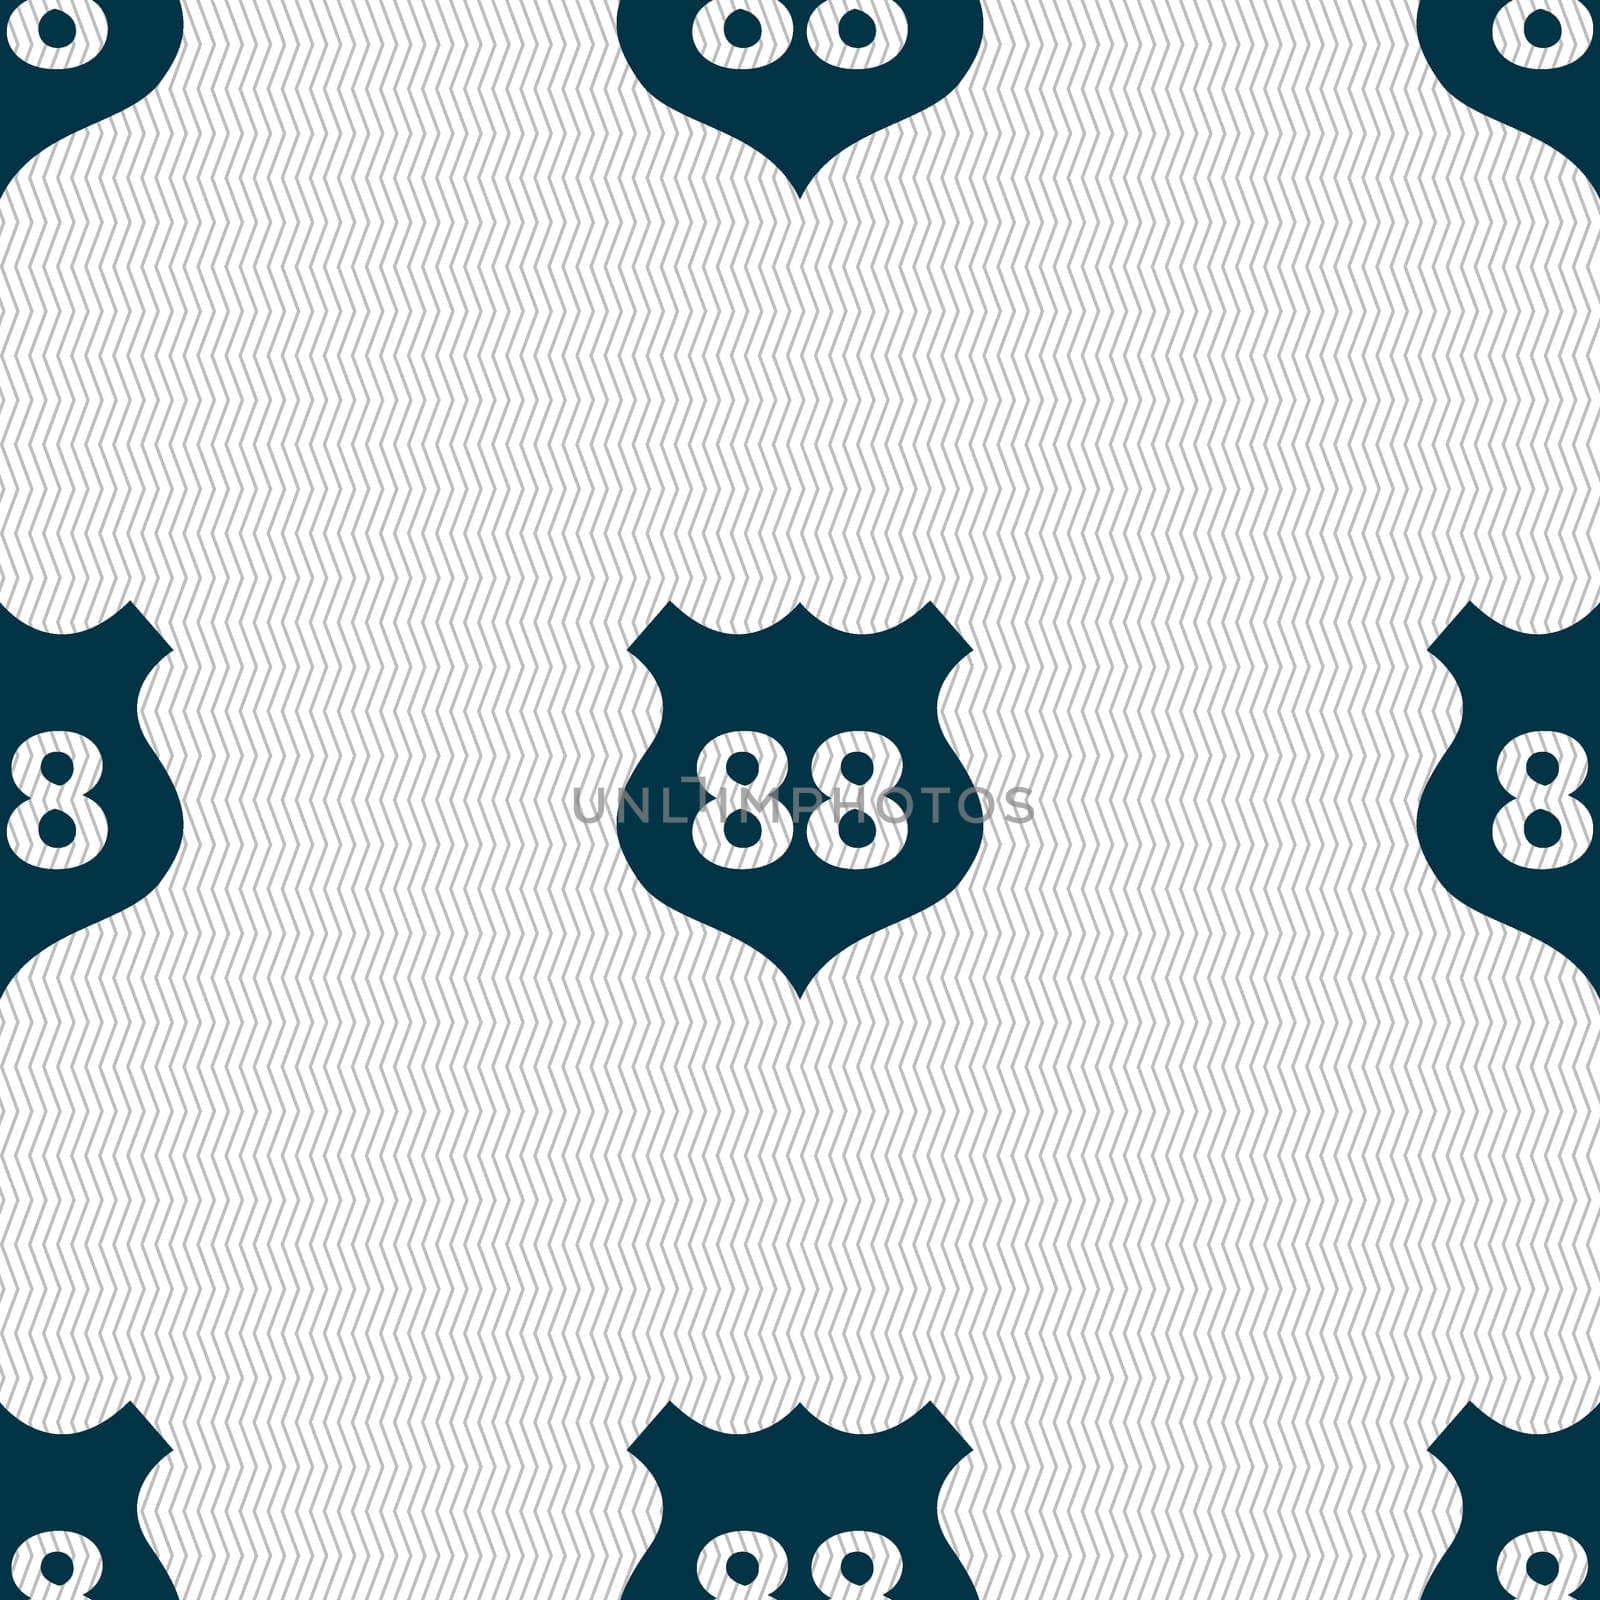 Route 88 highway icon sign. Seamless abstract background with geometric shapes. illustration